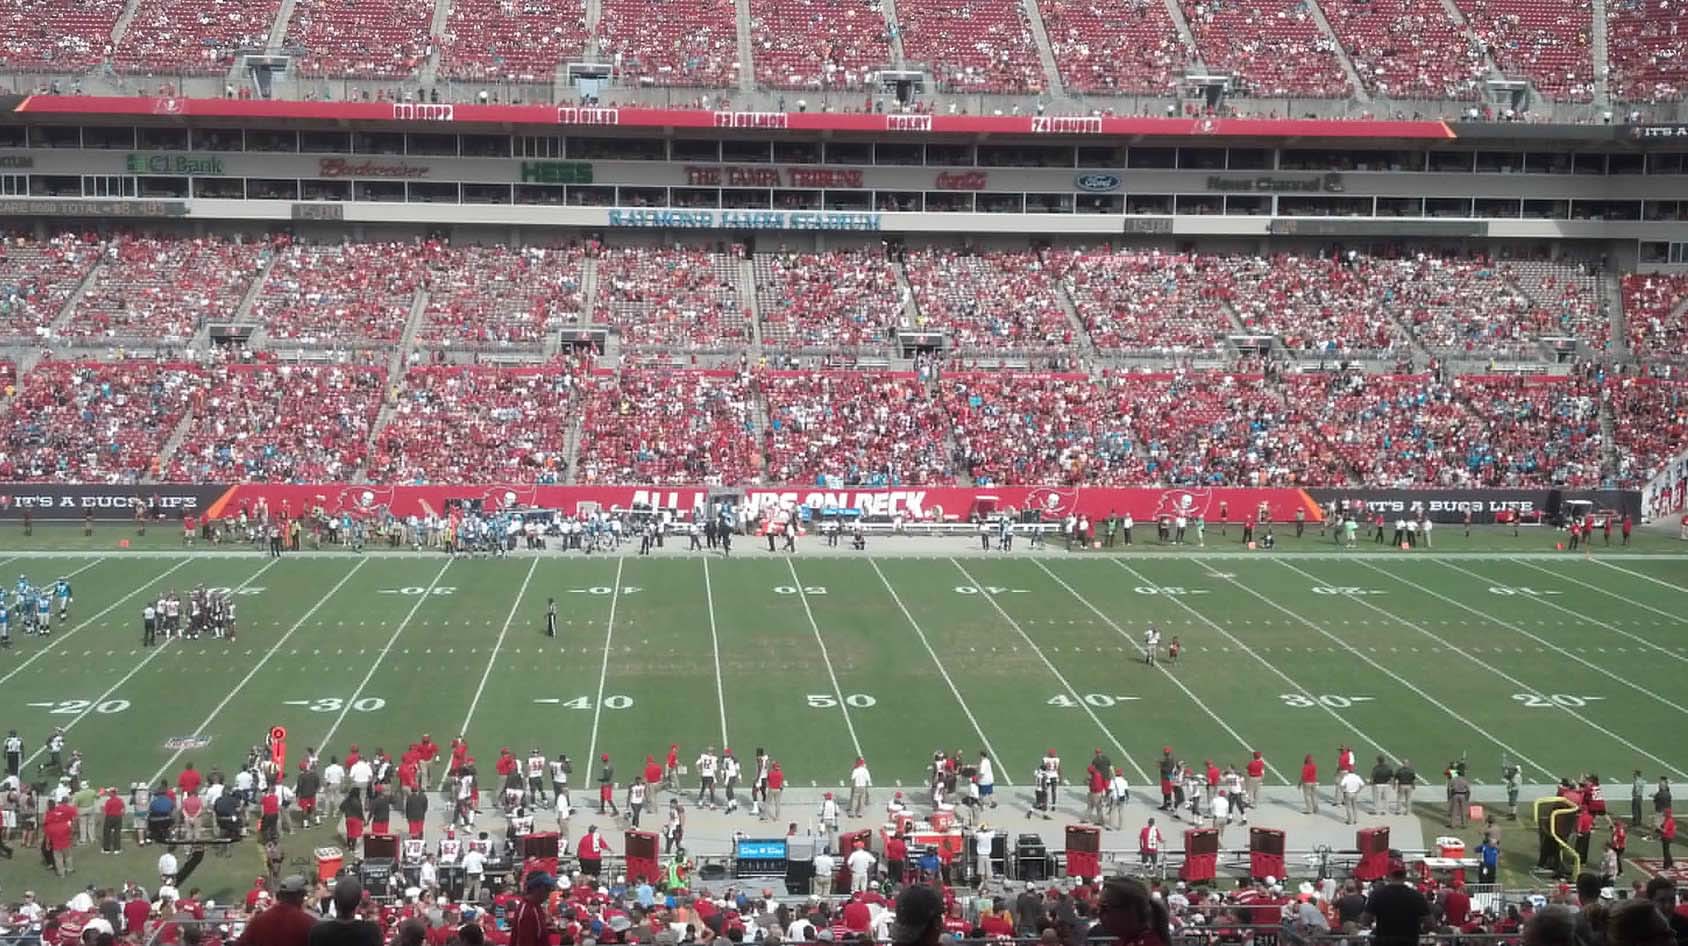 Tampa Bay Buccaneers Seating Chart Rows